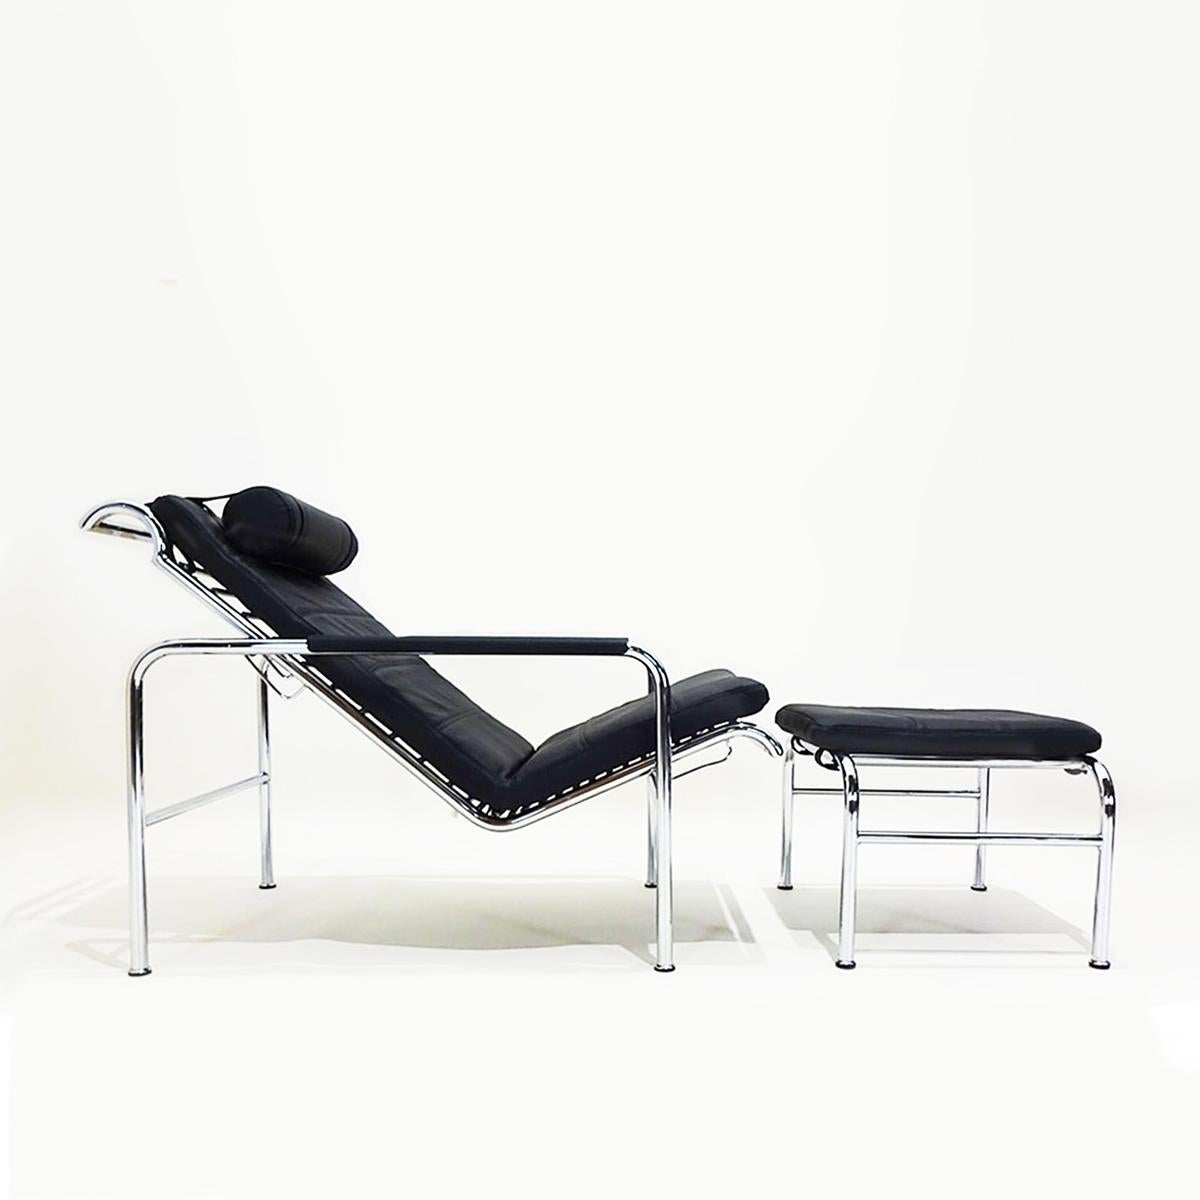 An outstanding black leather and chrome Genni reclining lounge chair with matching ottoman originally designed by Gabriele Mucchi in 1935. 

This lounge chair is in excellent vintage condition save a couple of small marks in the chrome on the